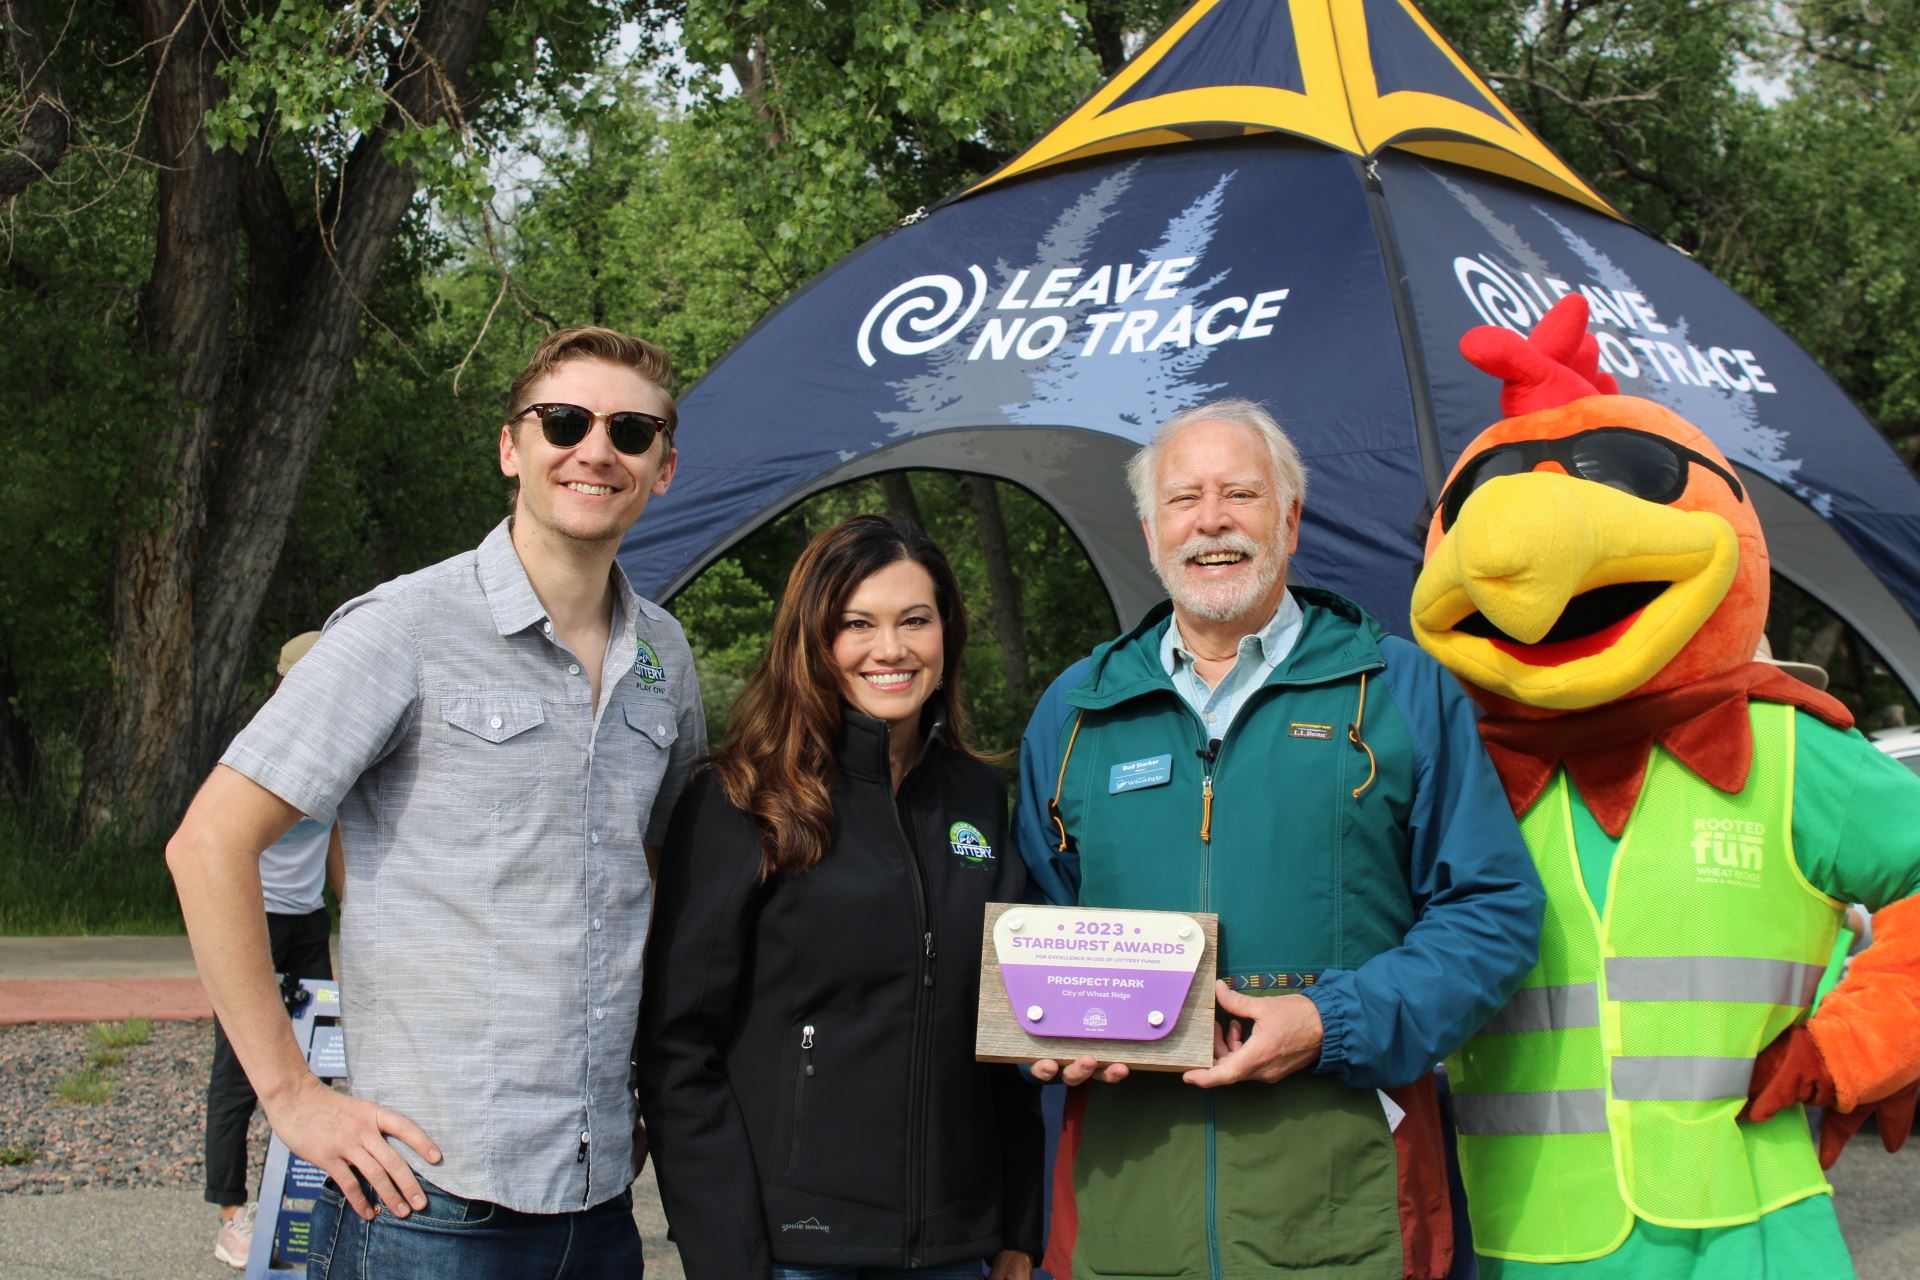 Mayor Starker, Booster the Rooster, and Colorado Lottery Staff with Starburst Award Plaque